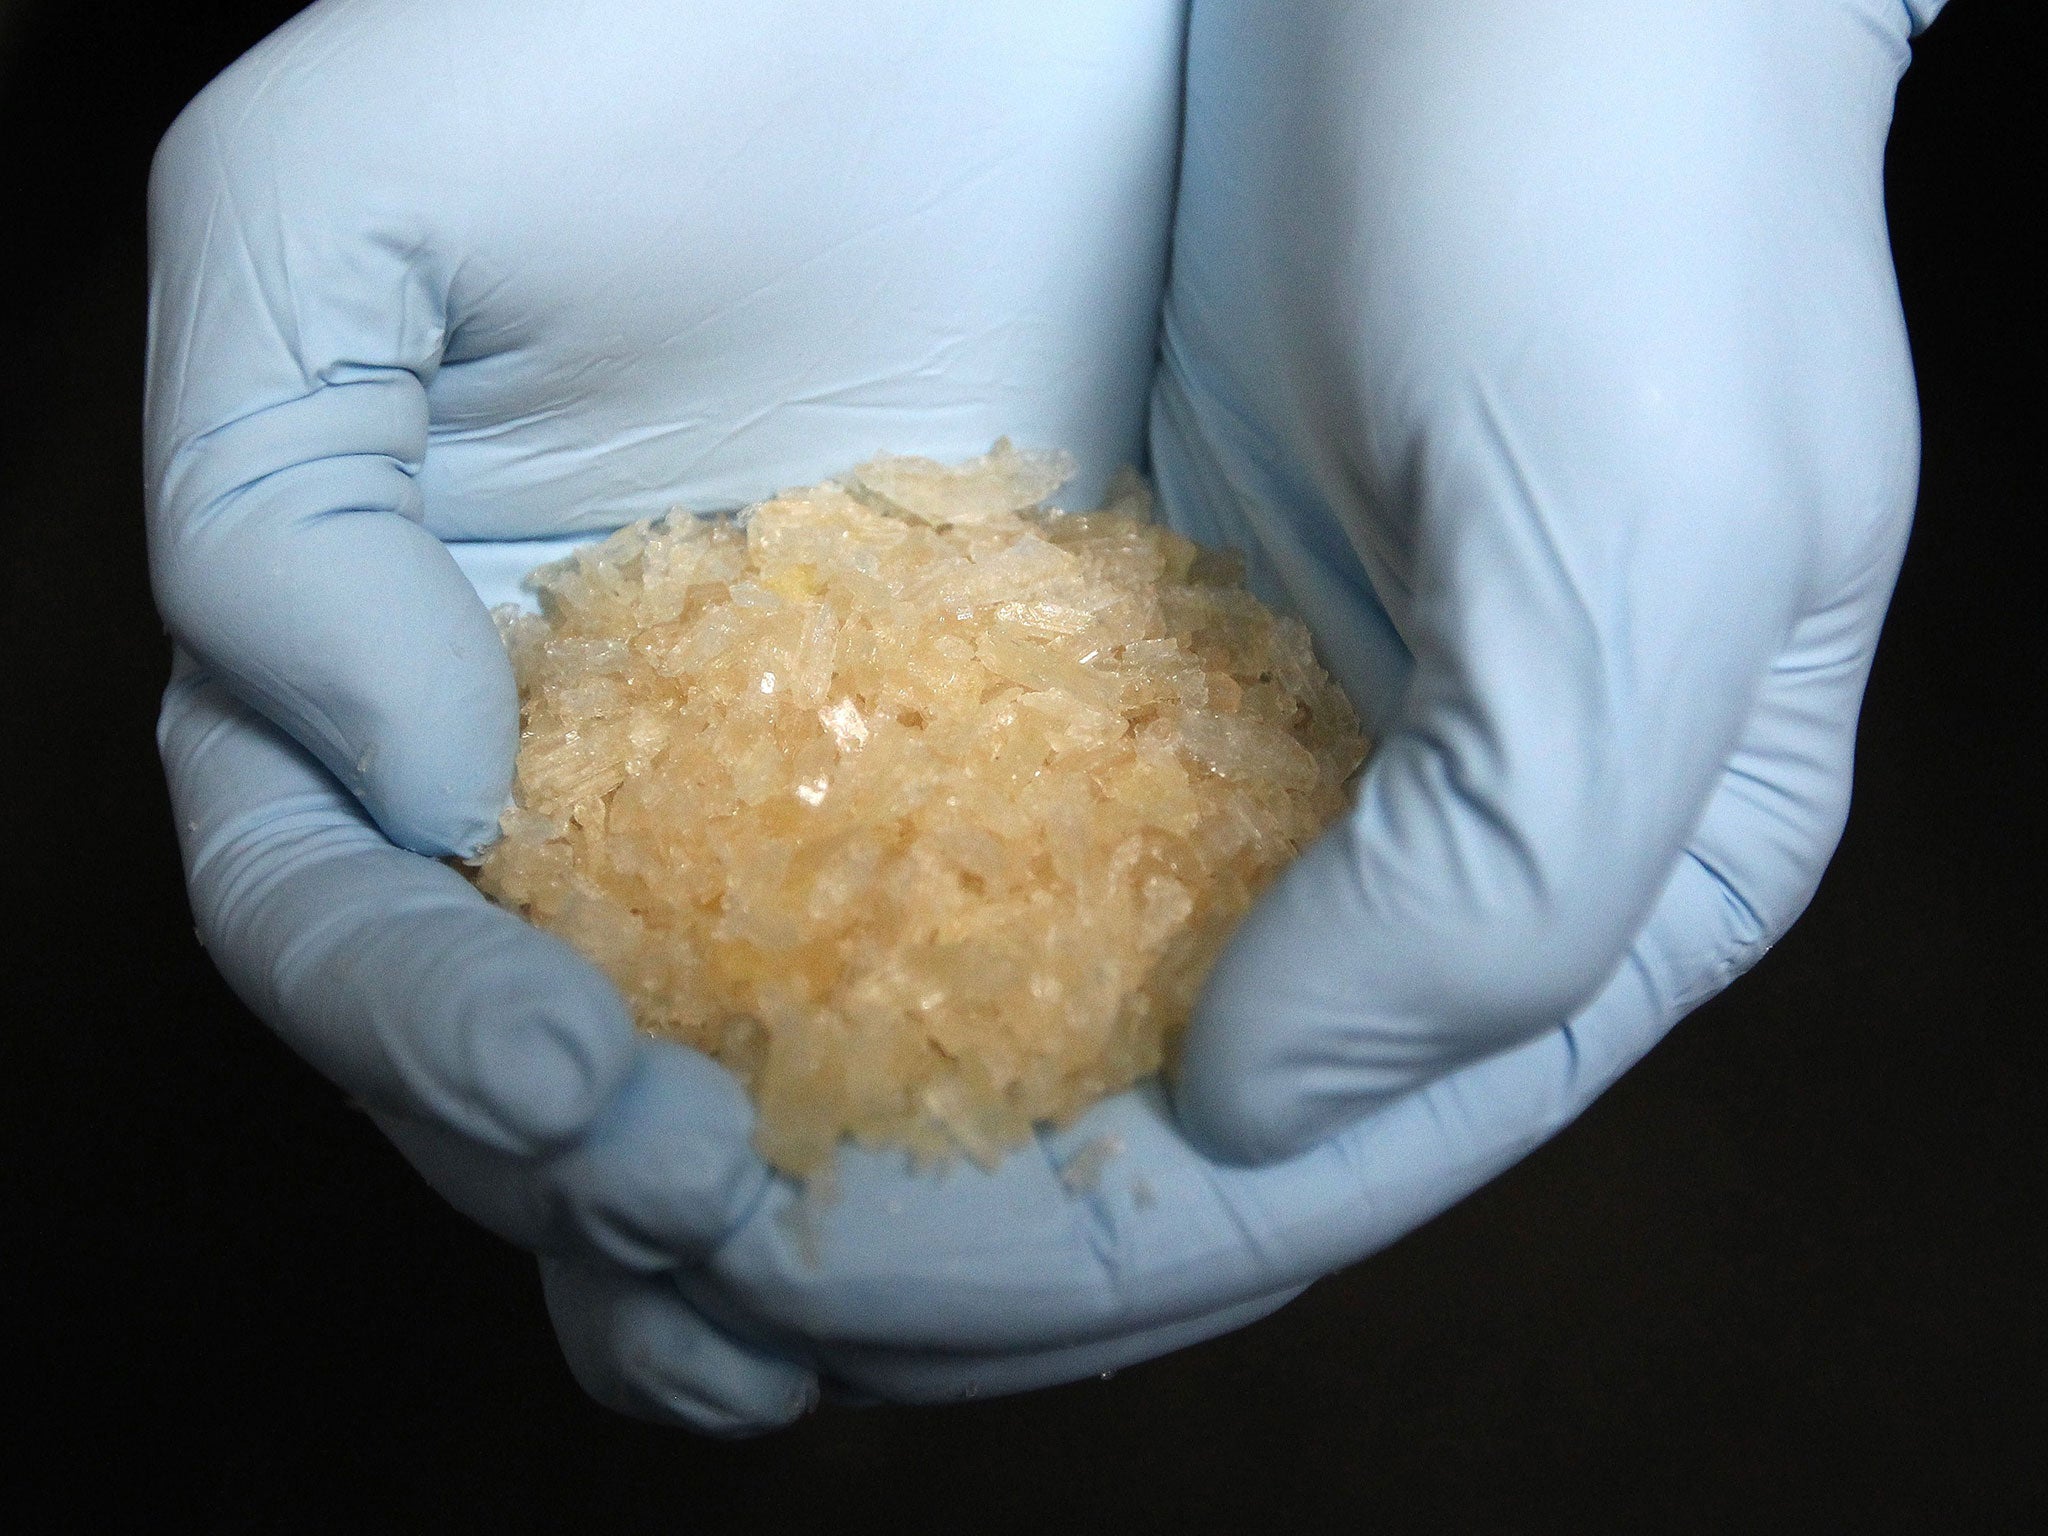 The us of methamphetamine in east and southeast Asia and Oceania is rising